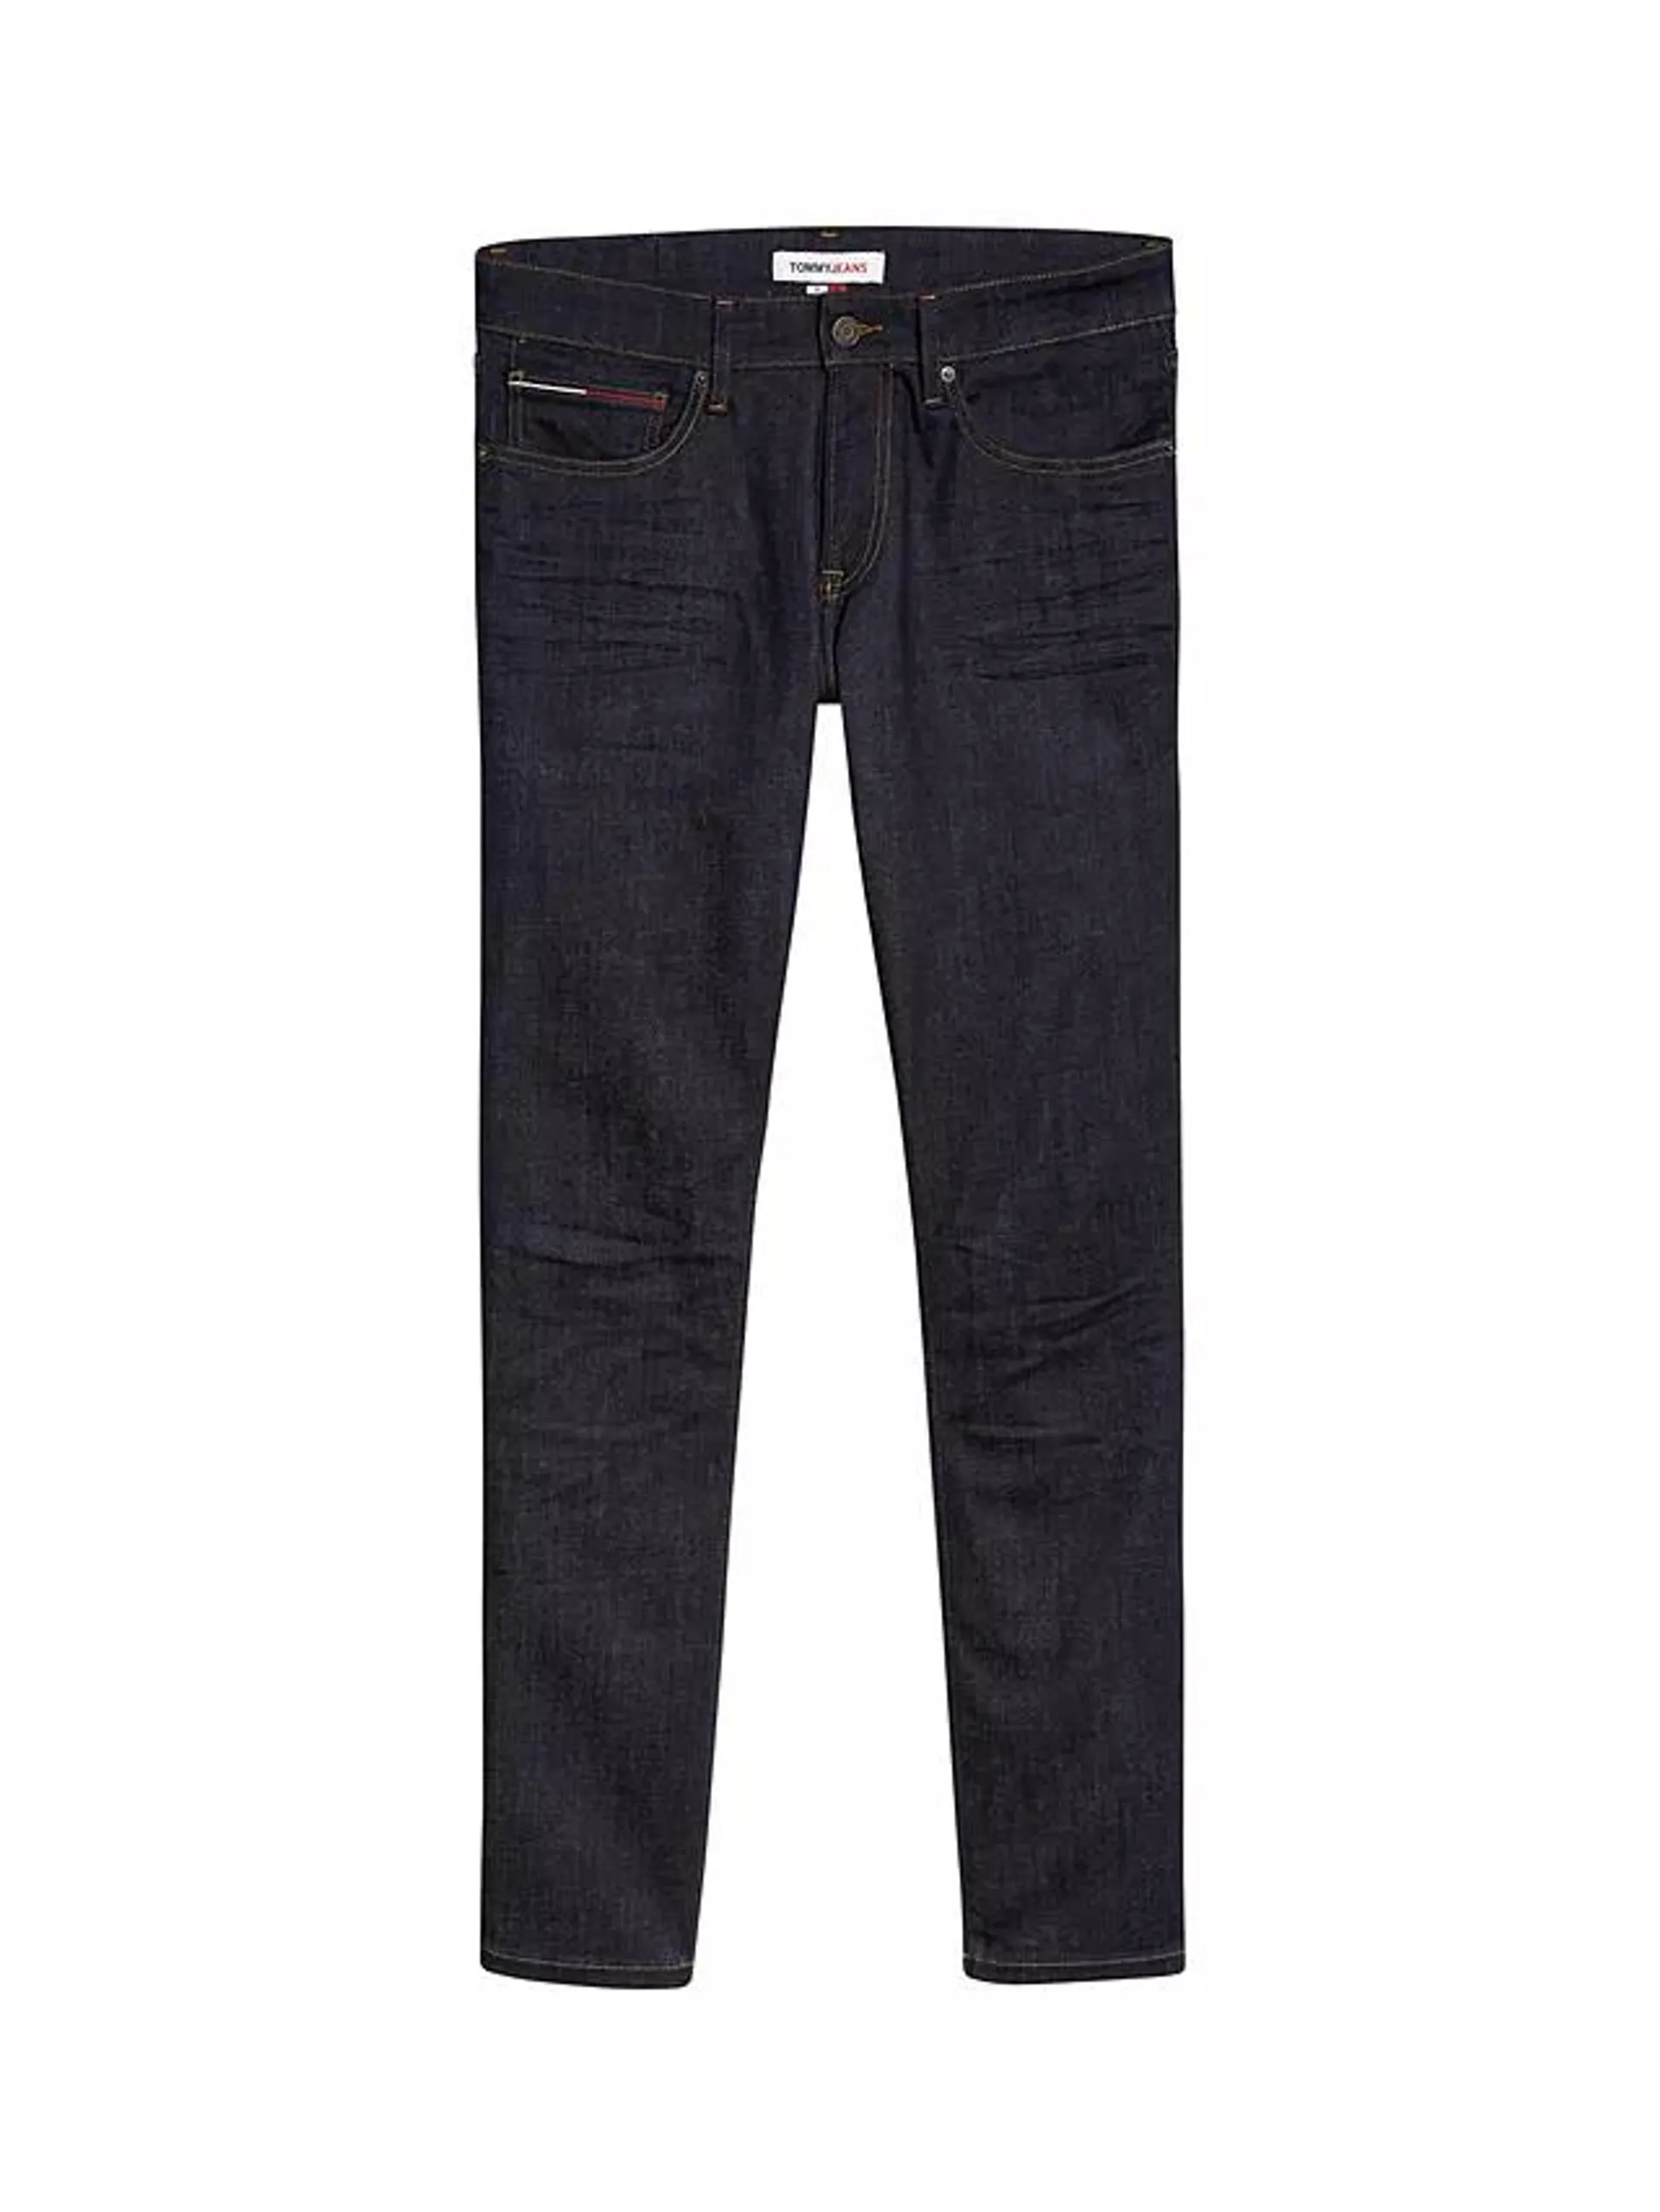 Tommy Jeans Slim Rince Jeans, Rinse Comfort